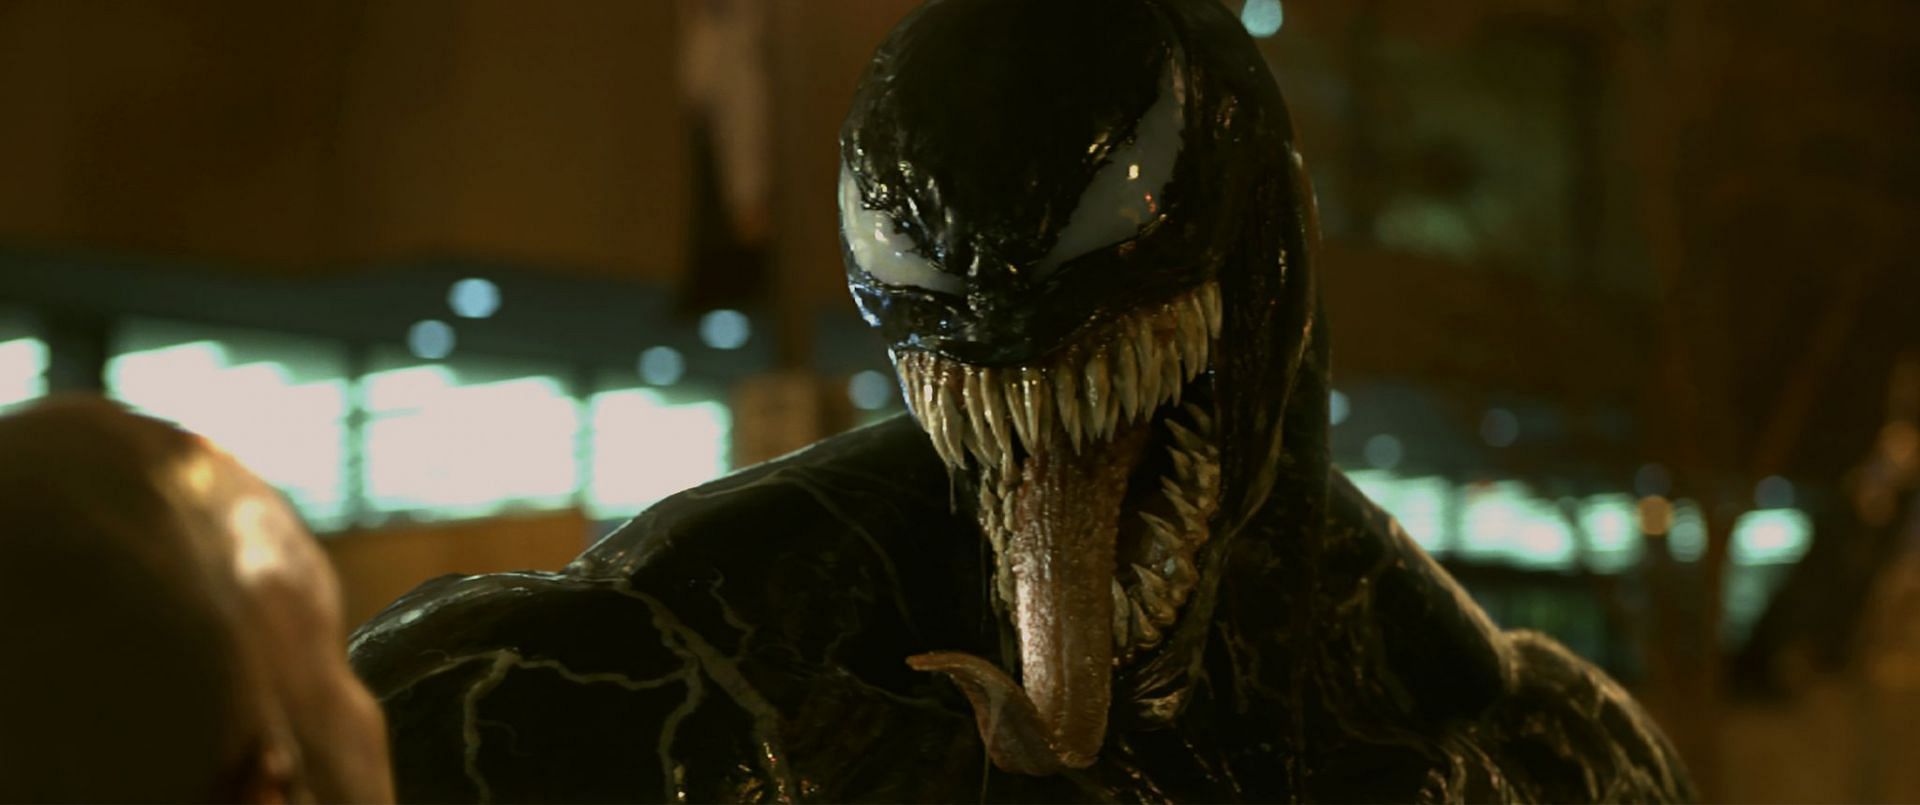 Venom 3 plot and cast remain a mystery, but fans can&#039;t wait to find out (Image via Sony Pictures)